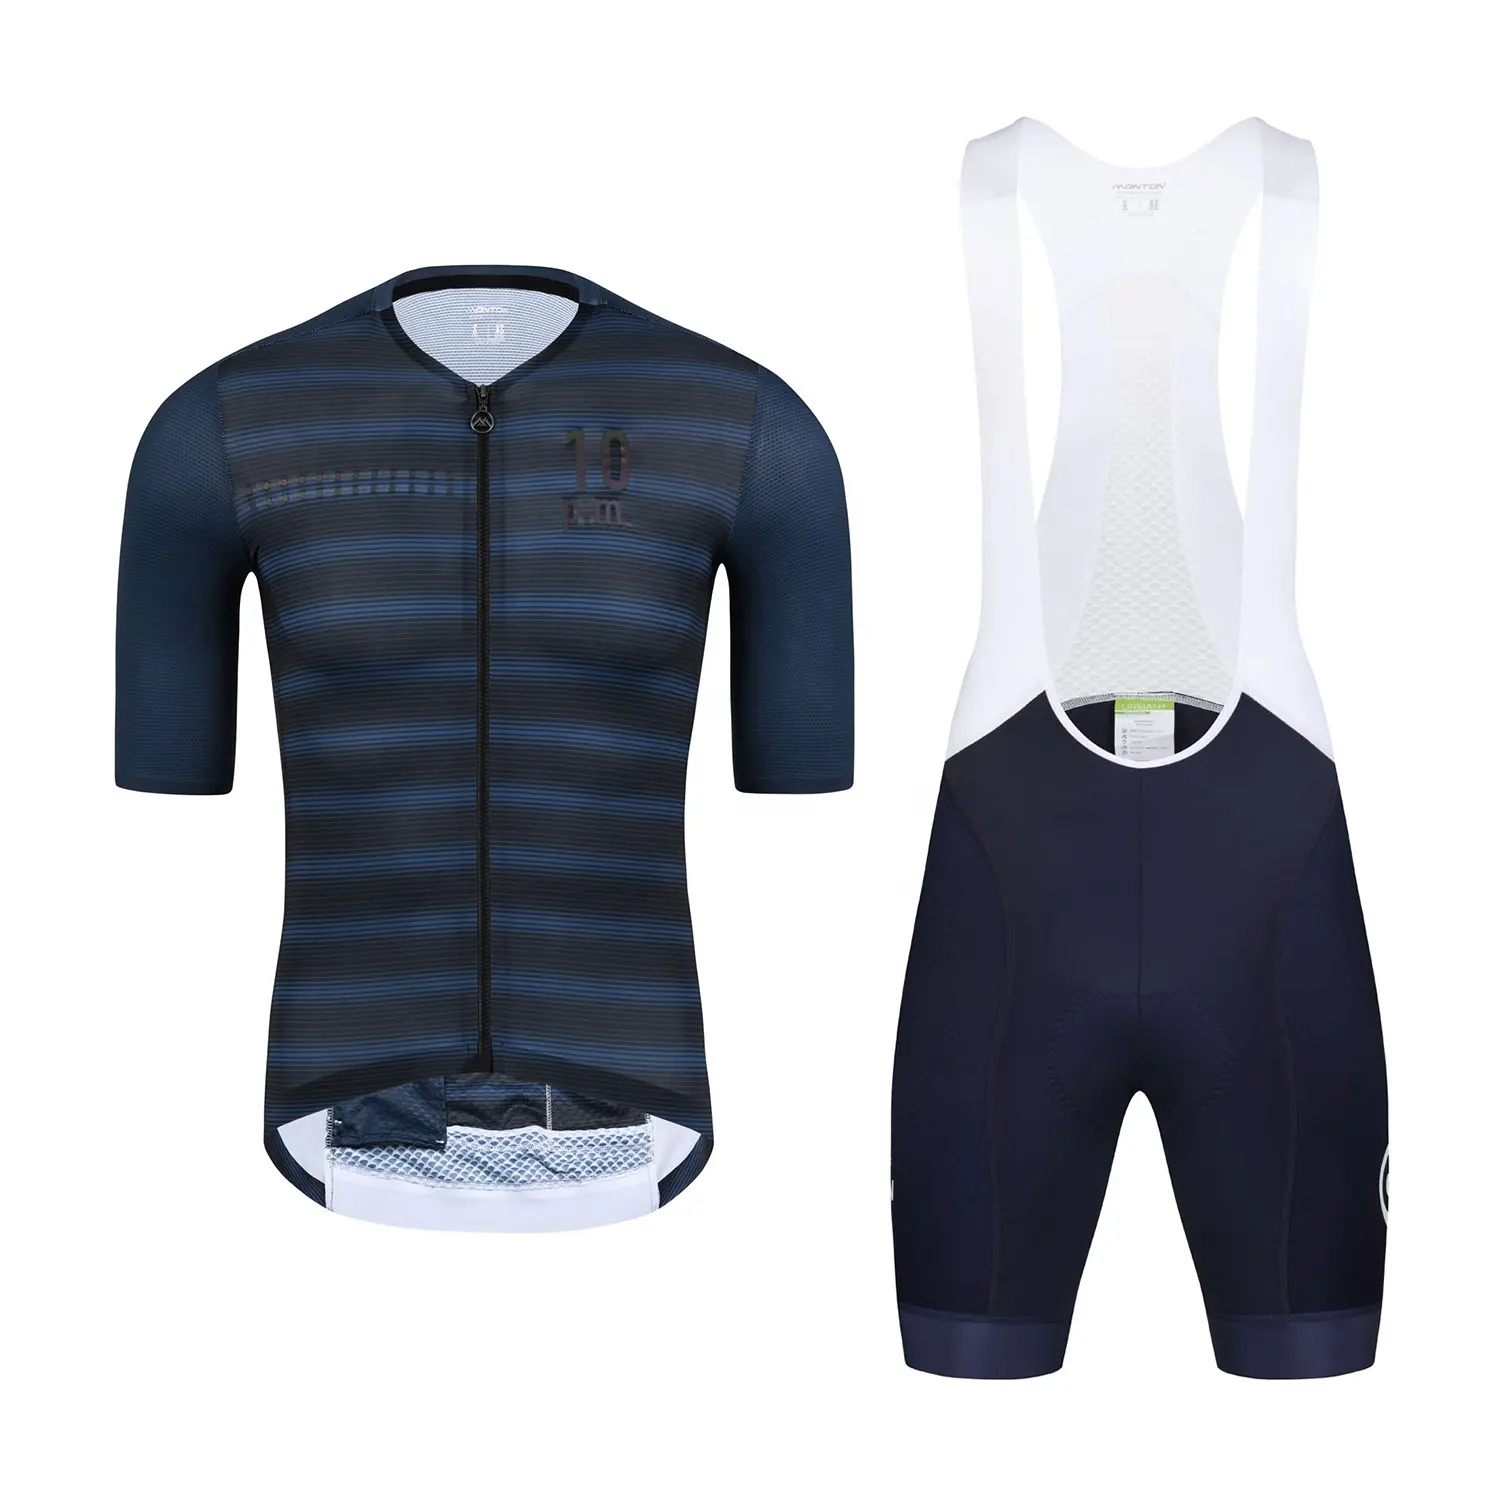 Private label monton new cycling clothing uniform road bike summer breathable clothing cycling set for men